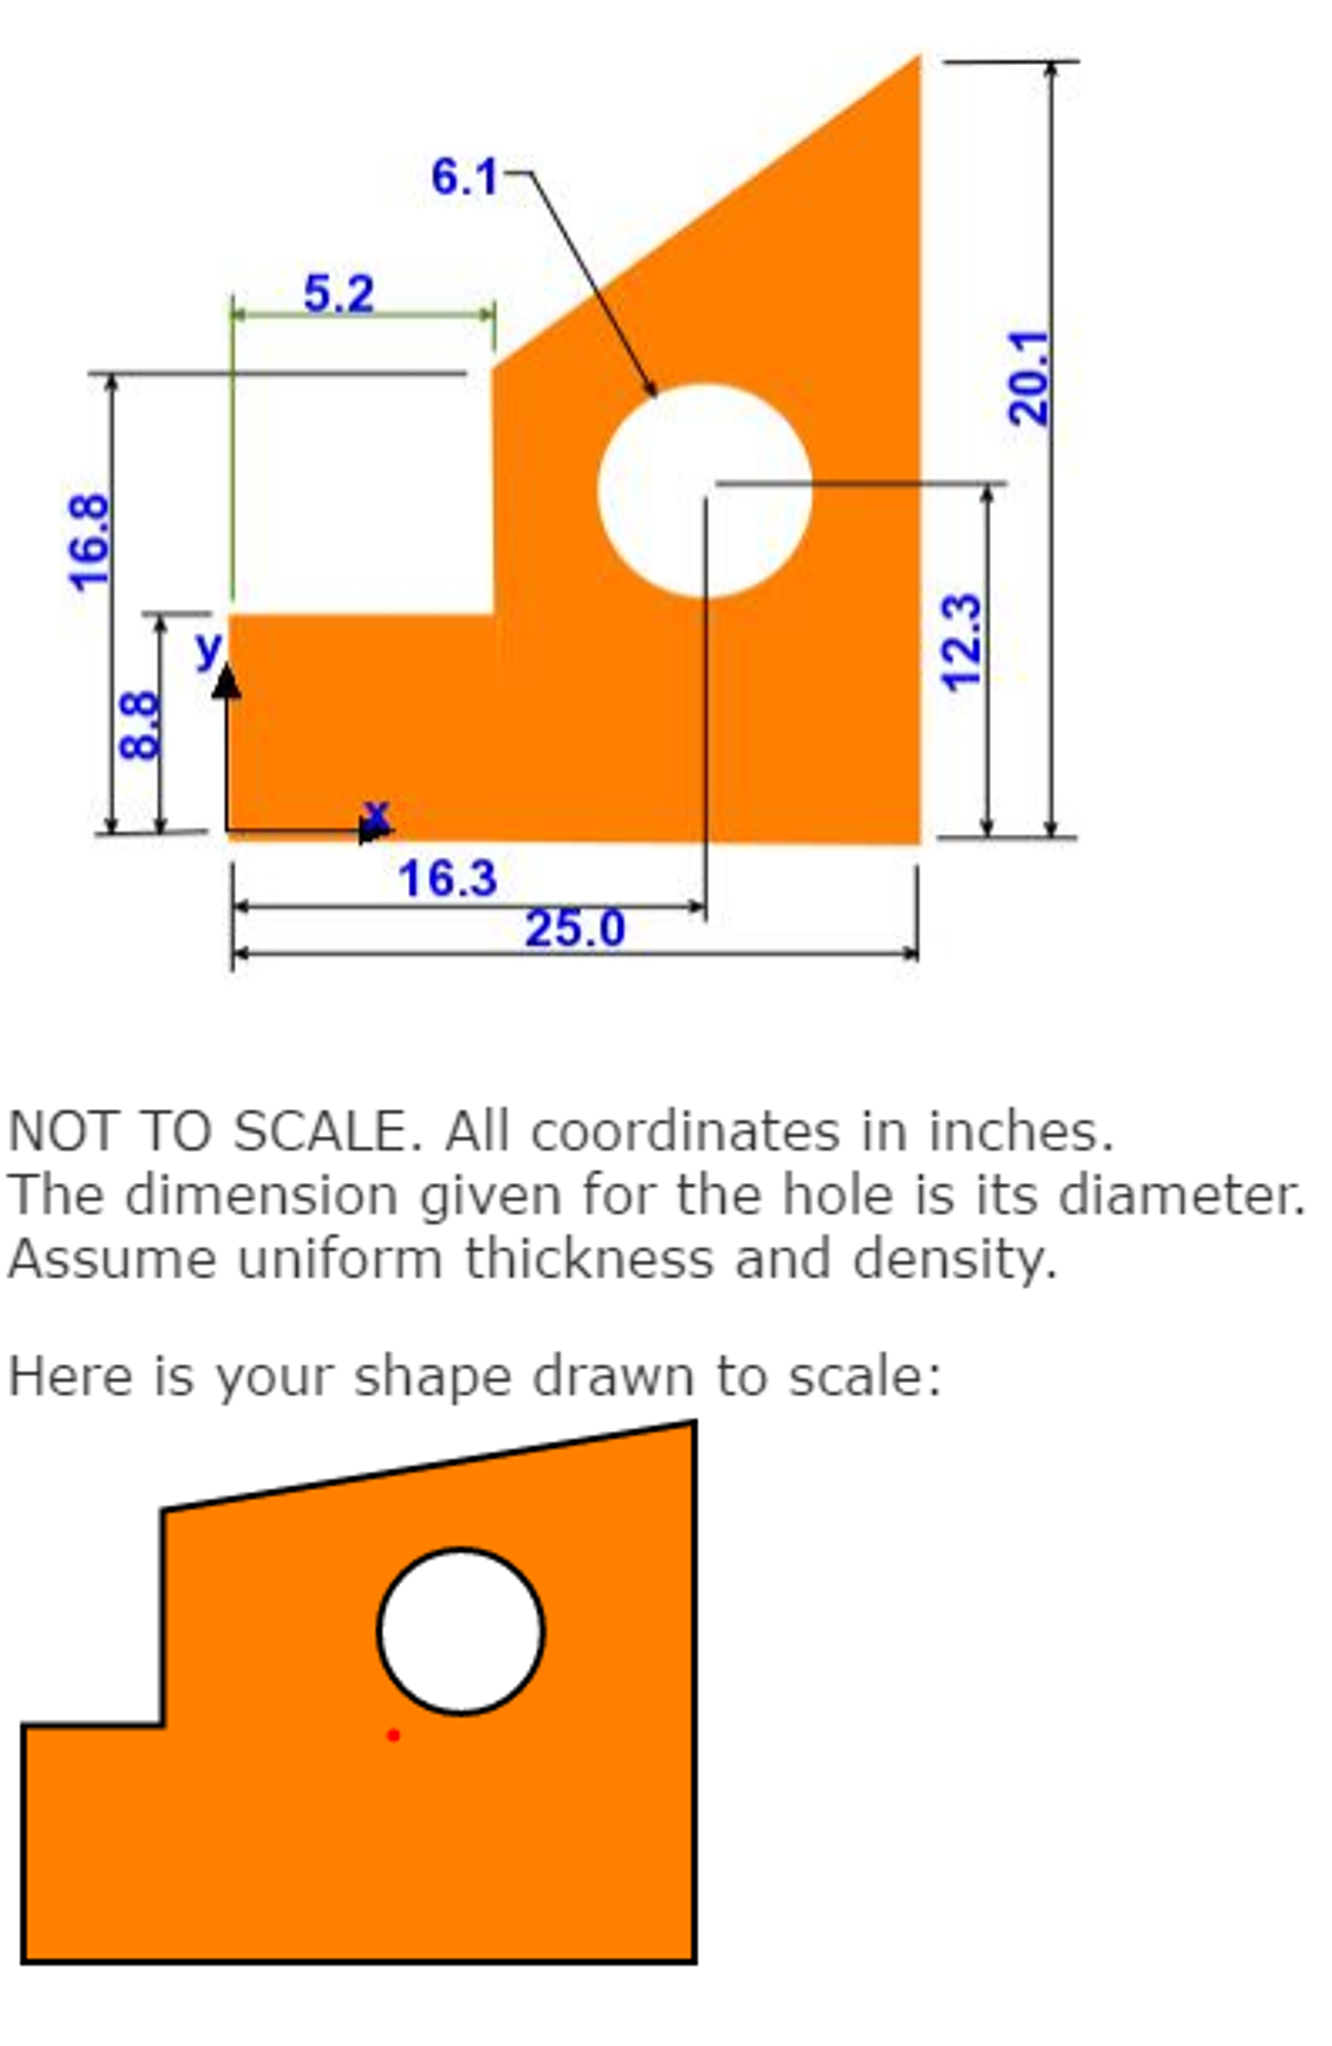 Find Center of Mass of an Object With a Hole